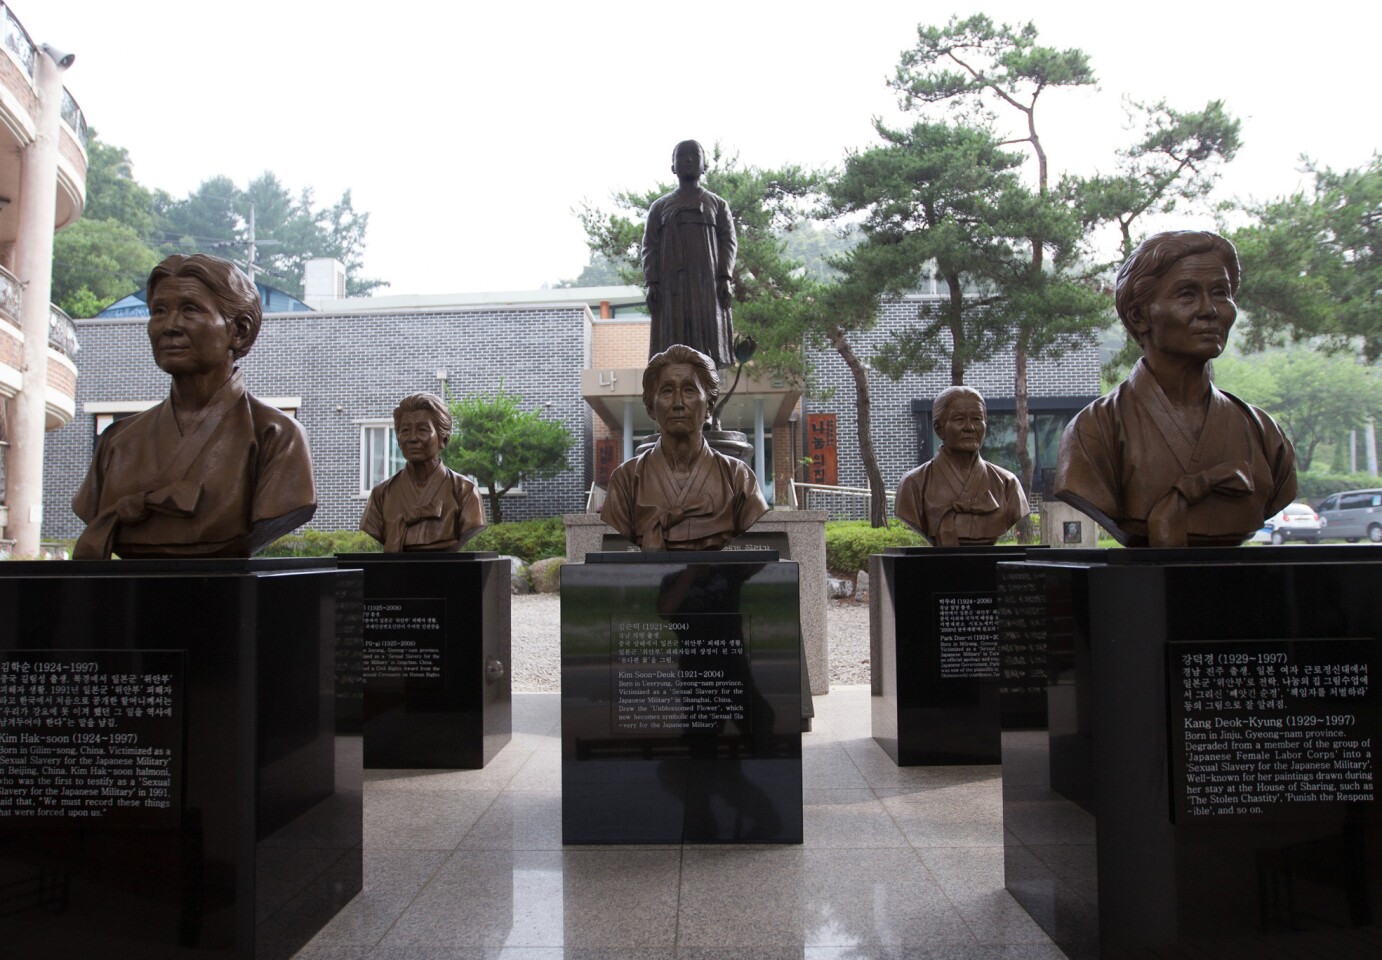 Bronze busts of "comfort women," who spent World War II in Japanese military brothels, cover a portion of the courtyard at "The House of Sharing" in Seoul. Details about each woman and her plight are engraved in marble.